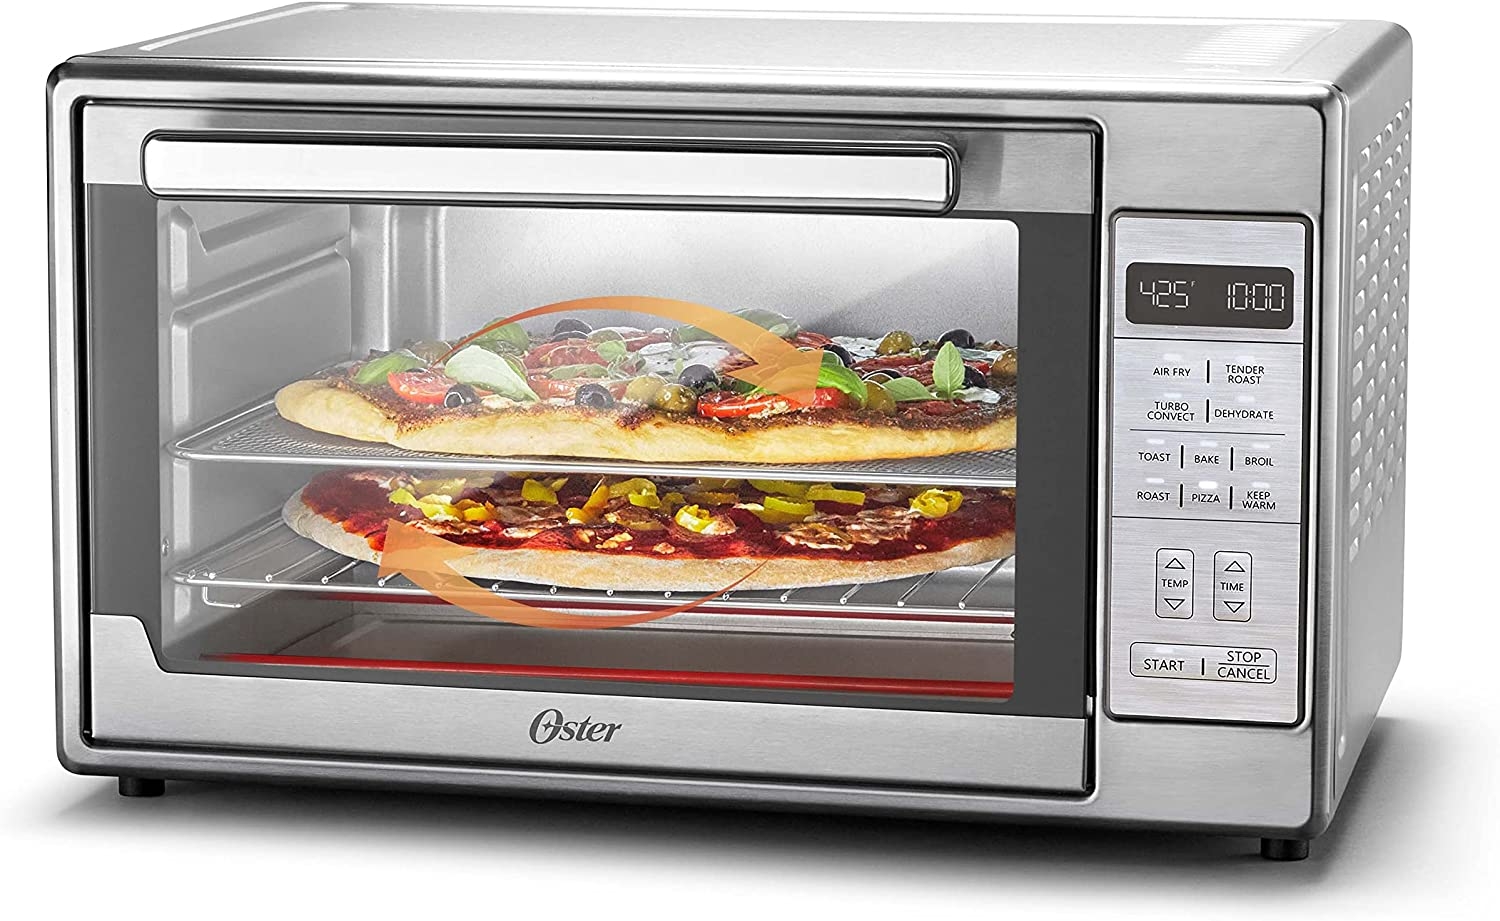 Oster Toaster Oven, 7-in-1 Countertop Toaster Oven, 10.5″ x 13″ Fits 2 Large Pizzas, Stainless Steel Import To Shop ×Product